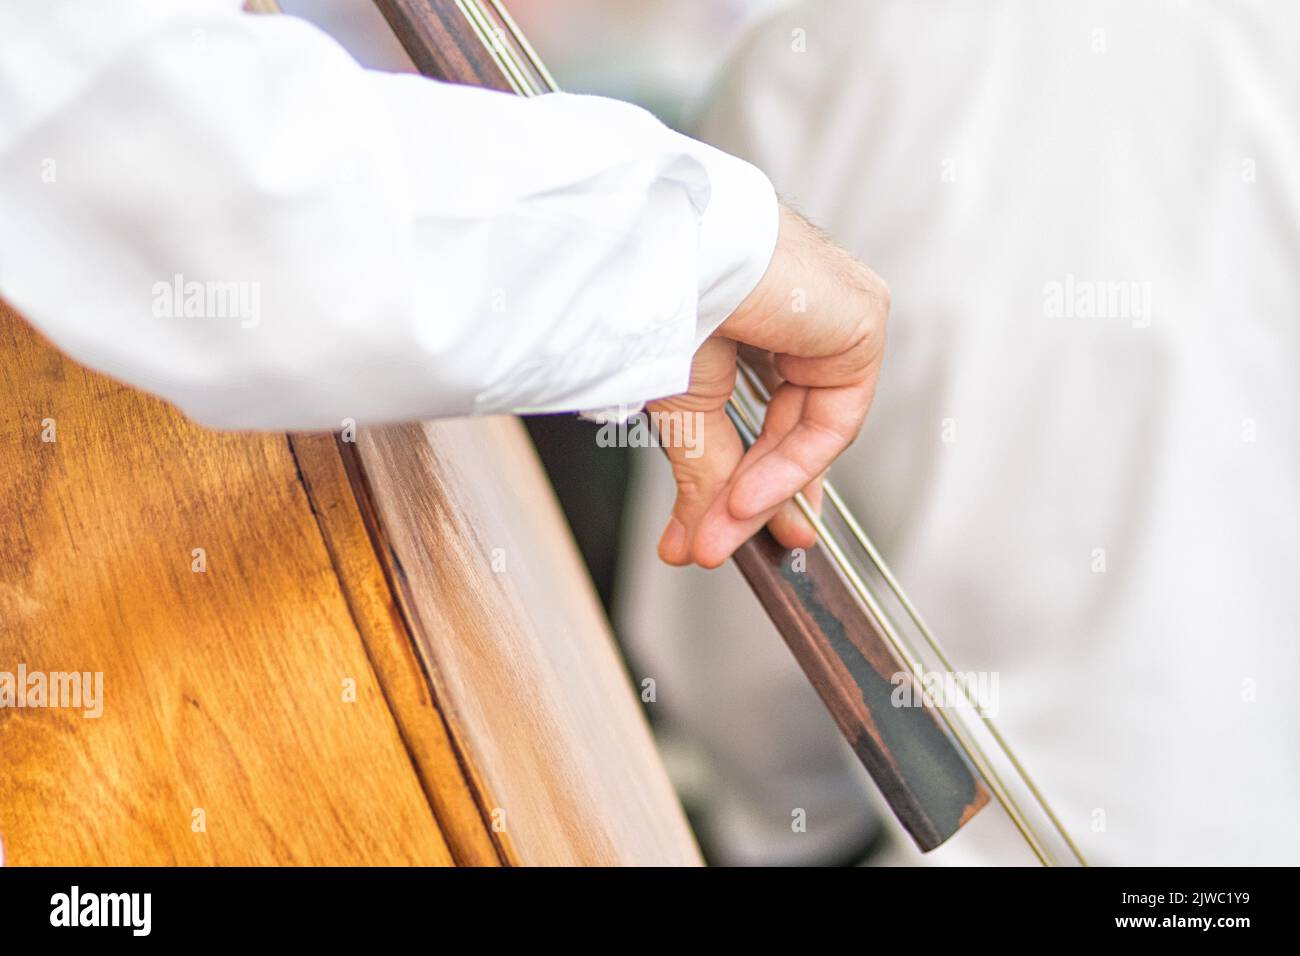 Detail of a double bass player's fingers during a performance Stock Photo